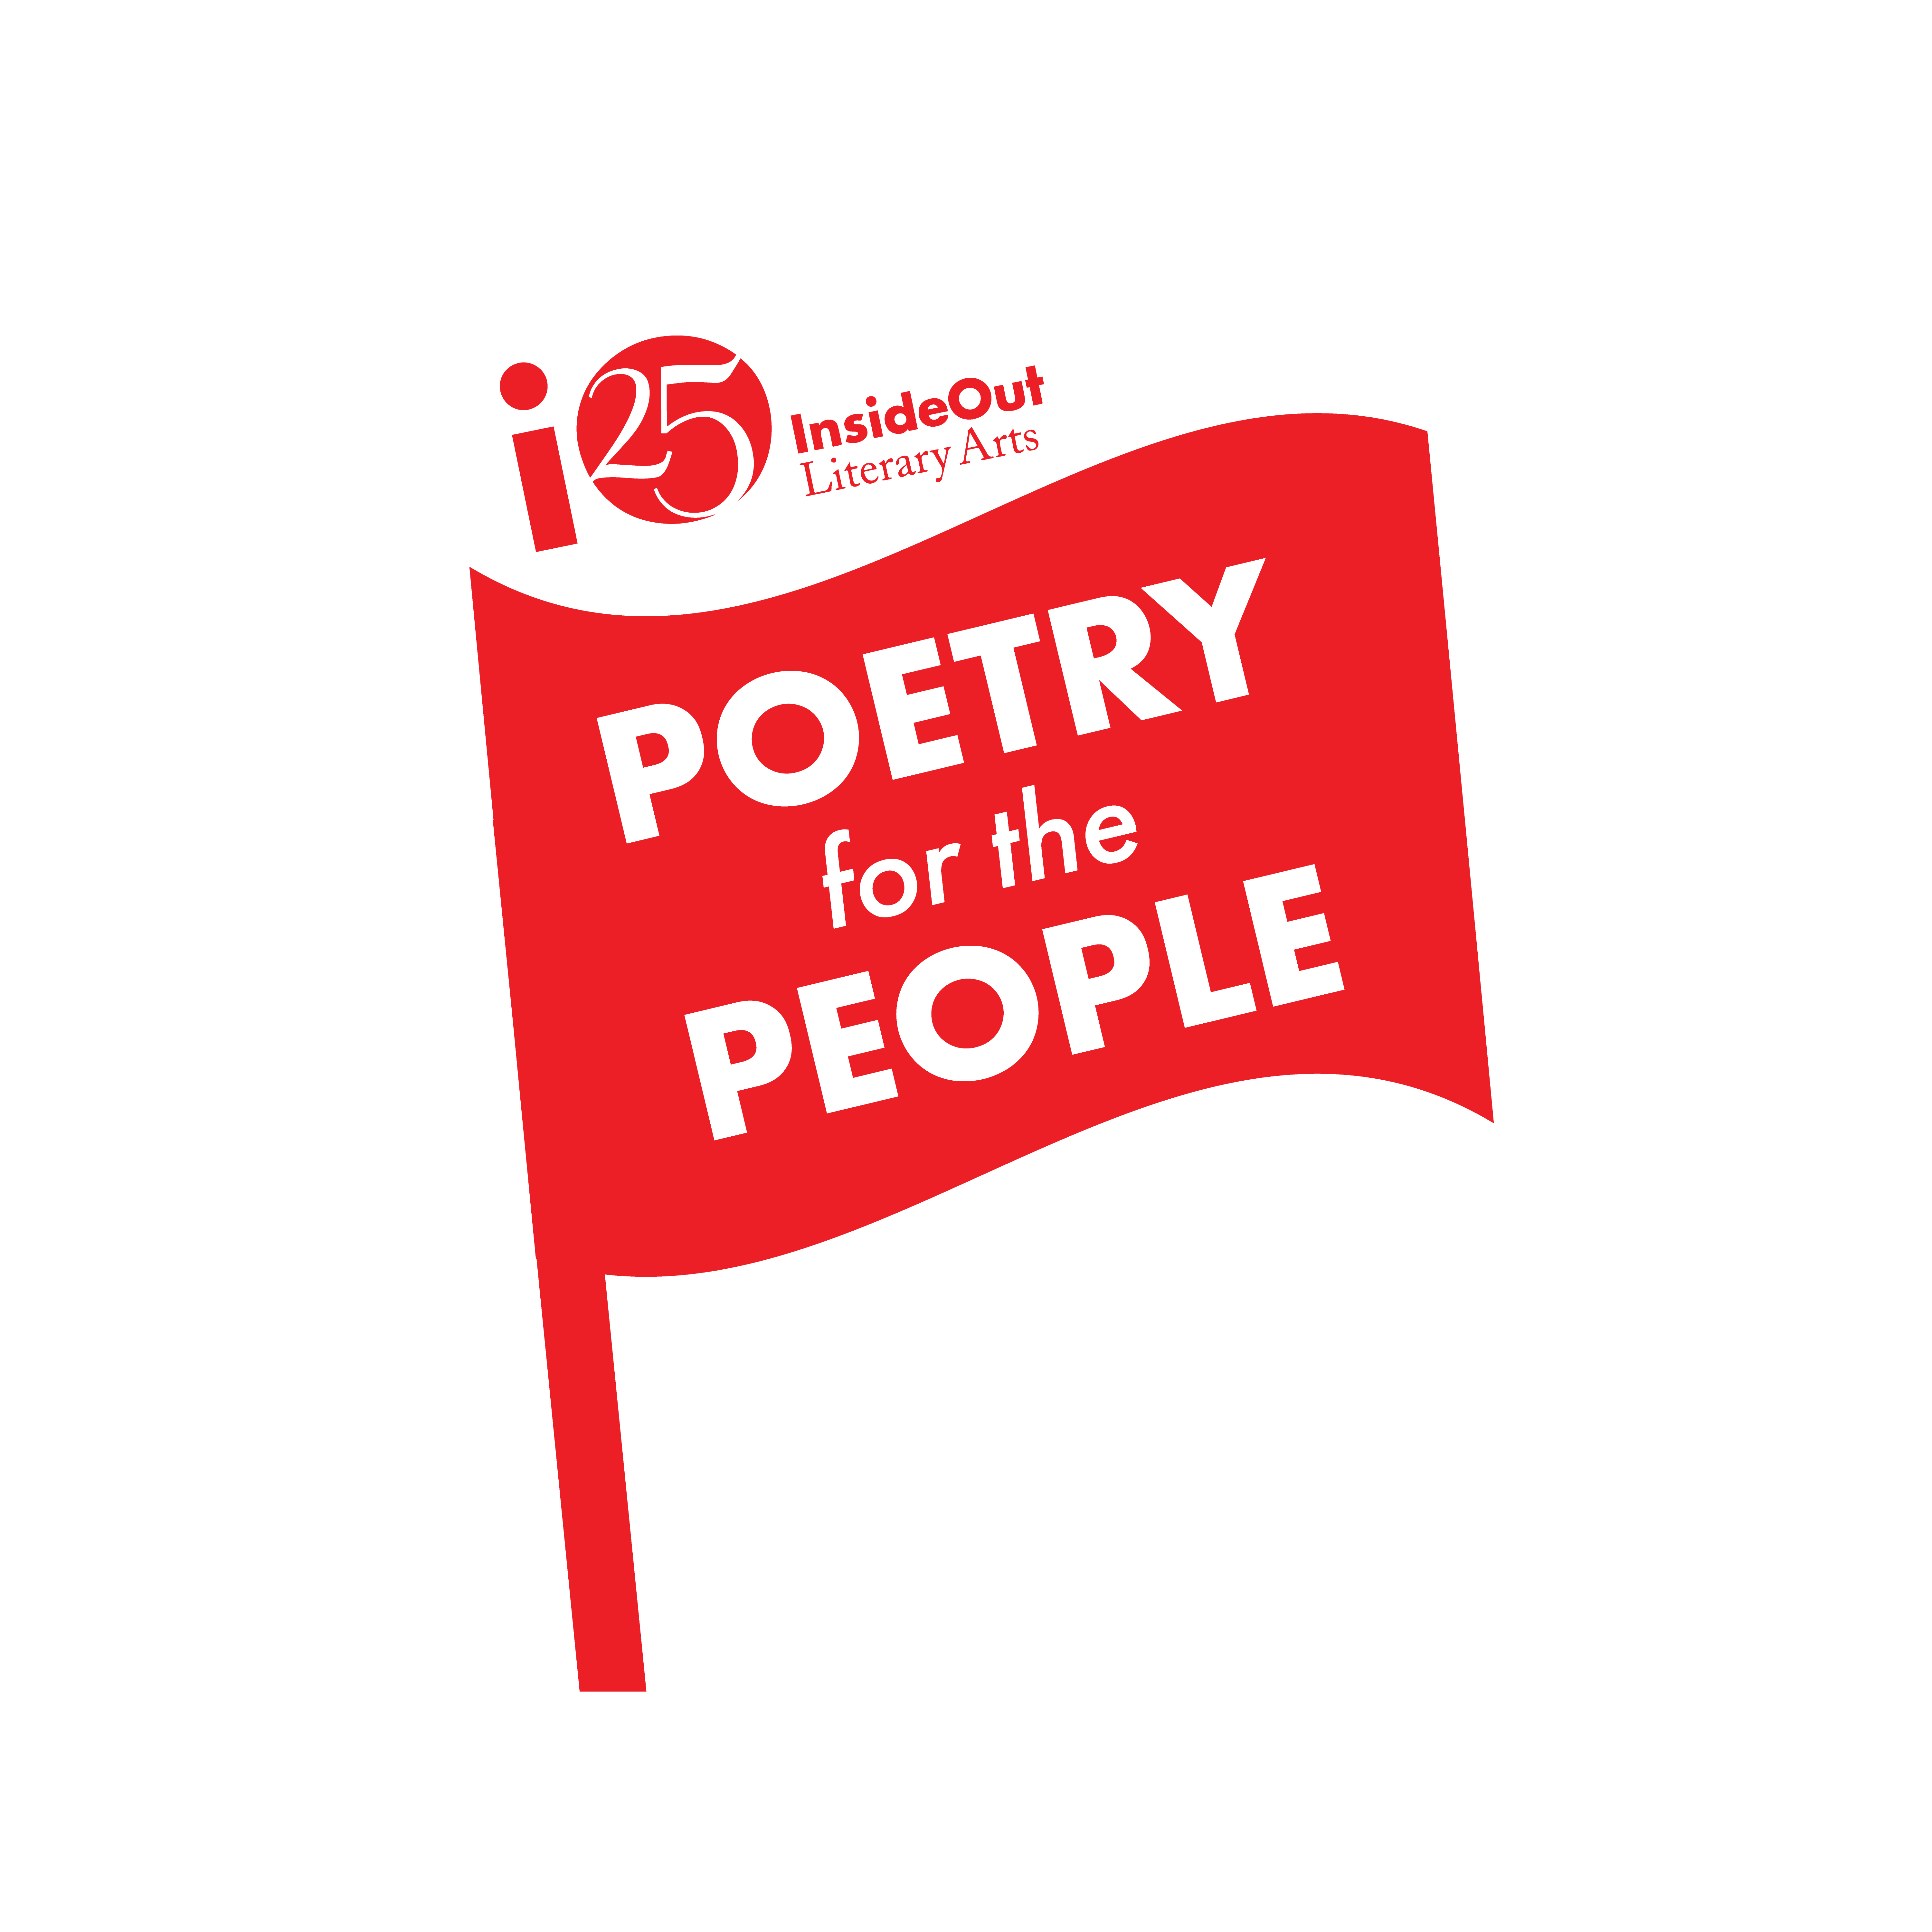 Digital graphic of a red flag with the words "Poetry for the People" written on it.